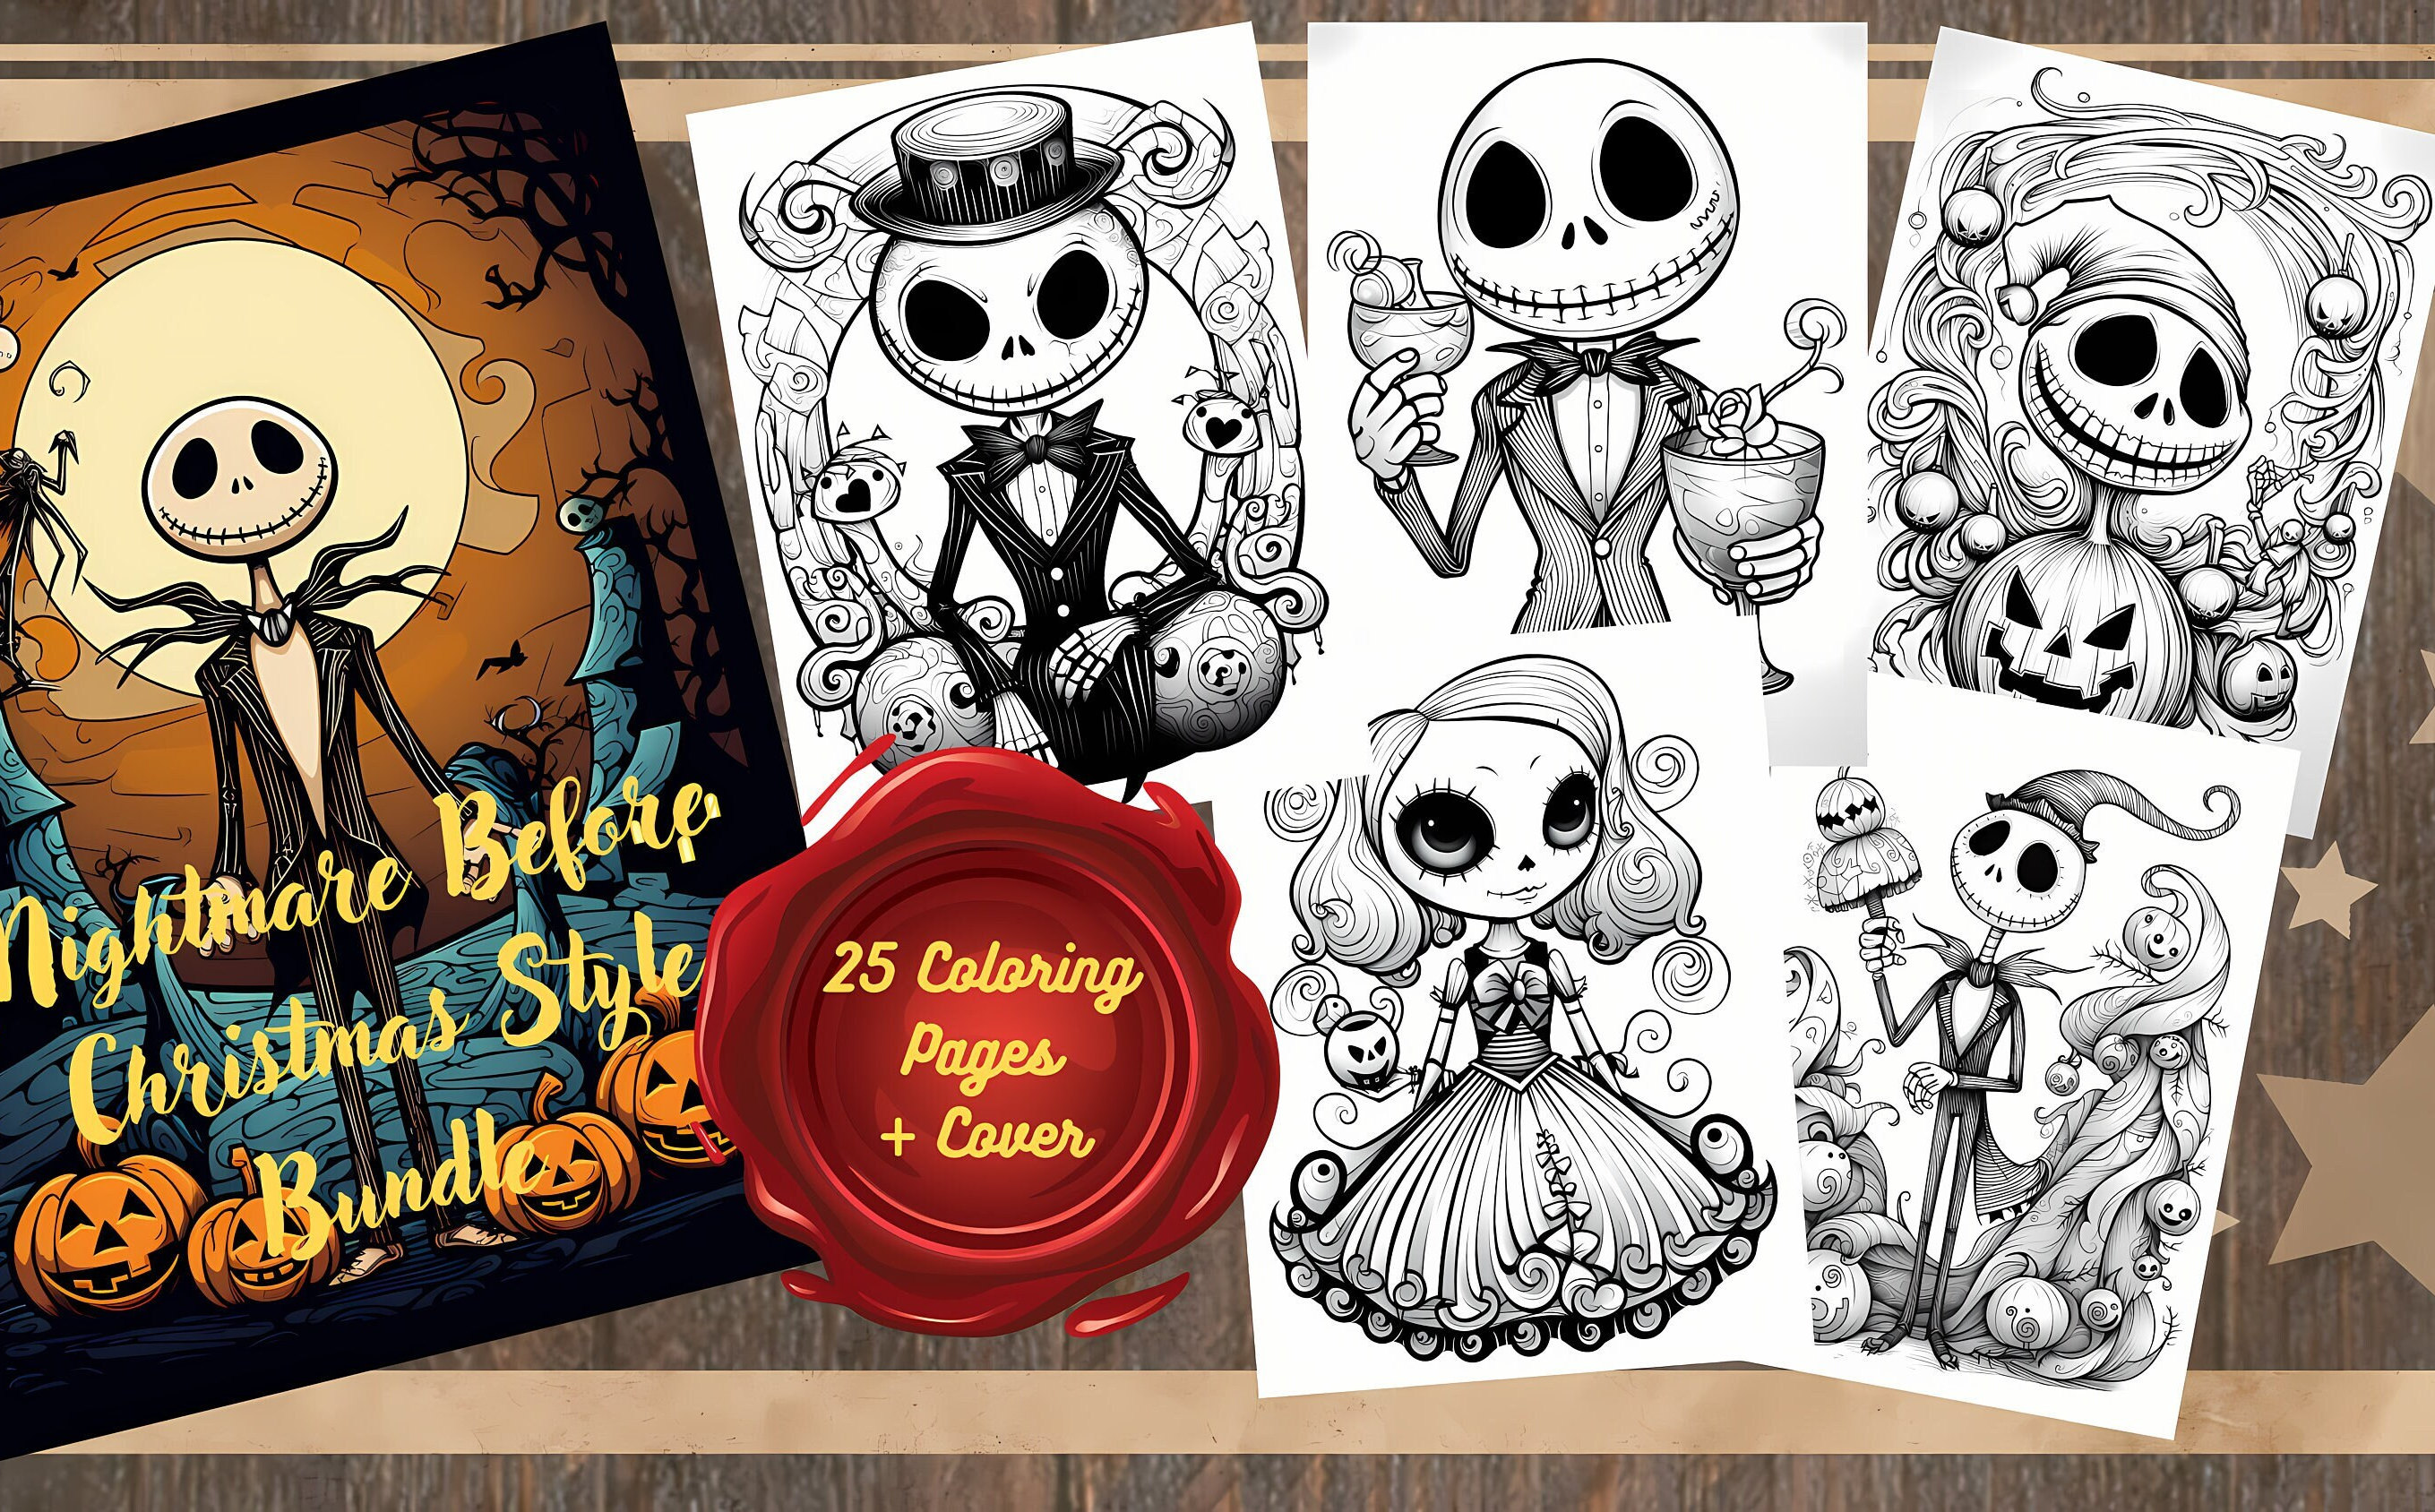 Jack sally coloring book nightmare before christmas style coloring pages jack skellington fan gift stress relief